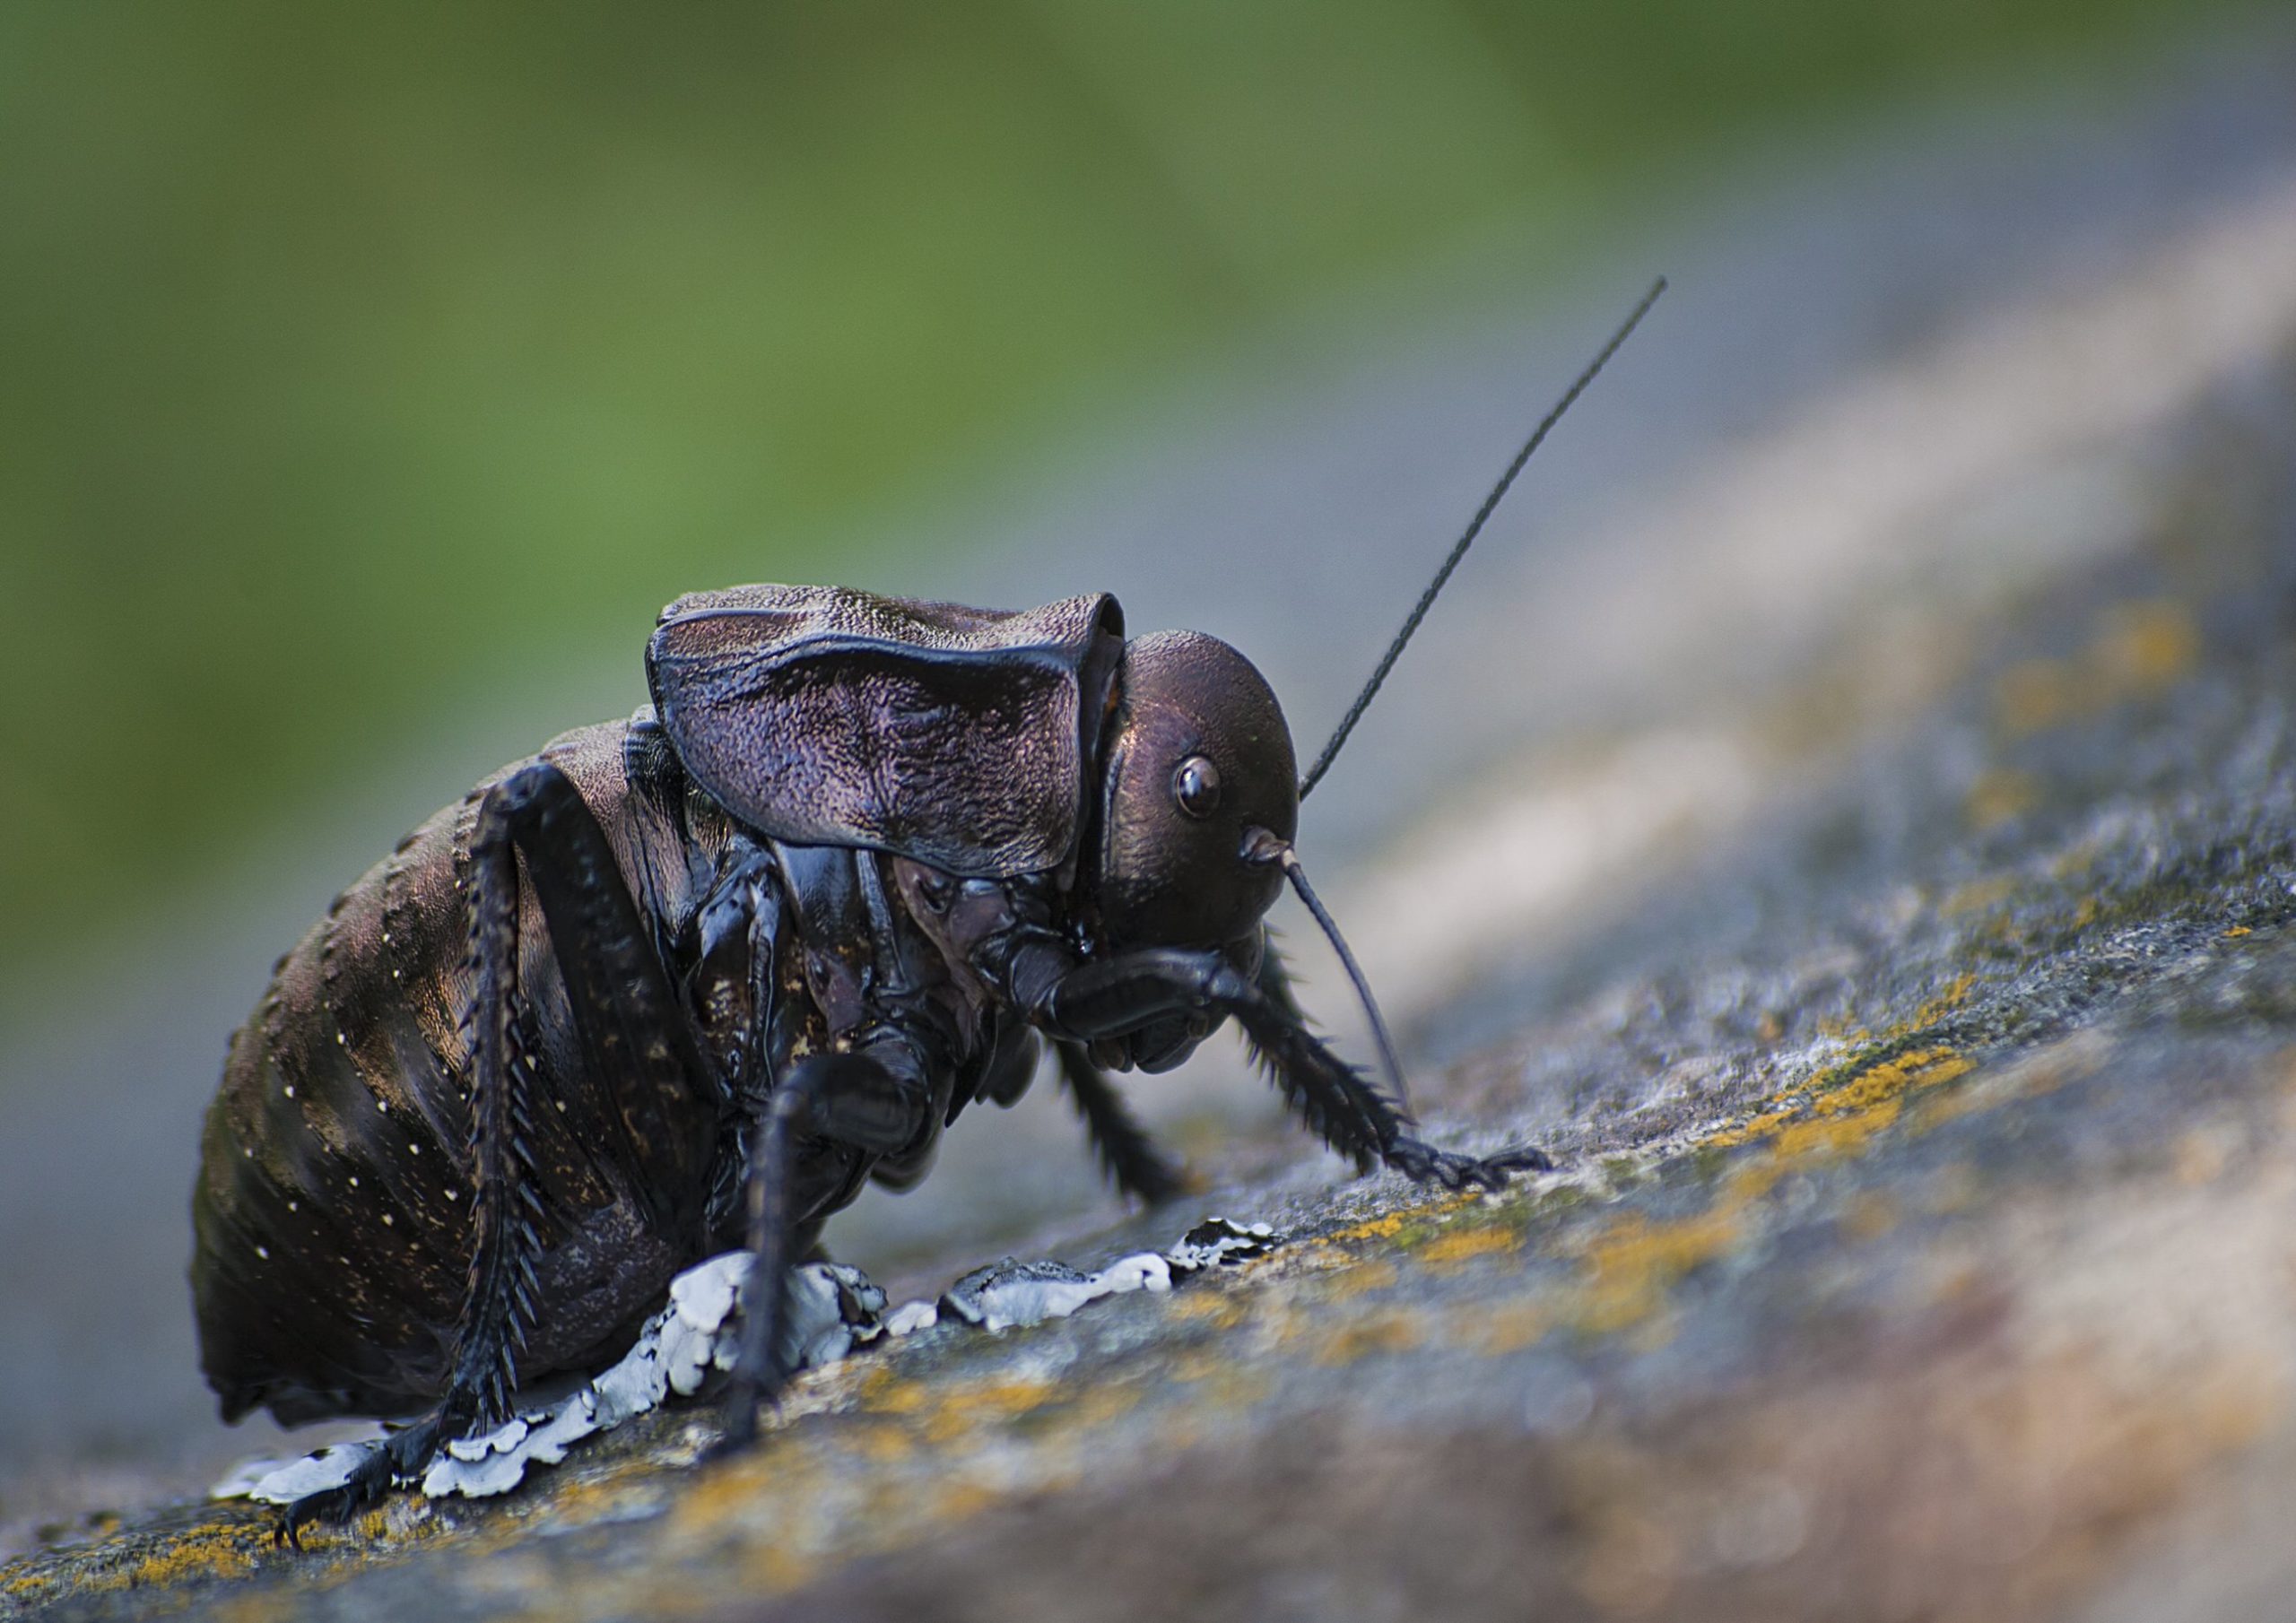 A male big-bellied cricket, Bradiphorus dasiphus, in the Măcin Mountains of Romania. To Iuliana Dediu, the appearance of this sturdy cricket of the mountains is reminiscent of an armoured soldier.